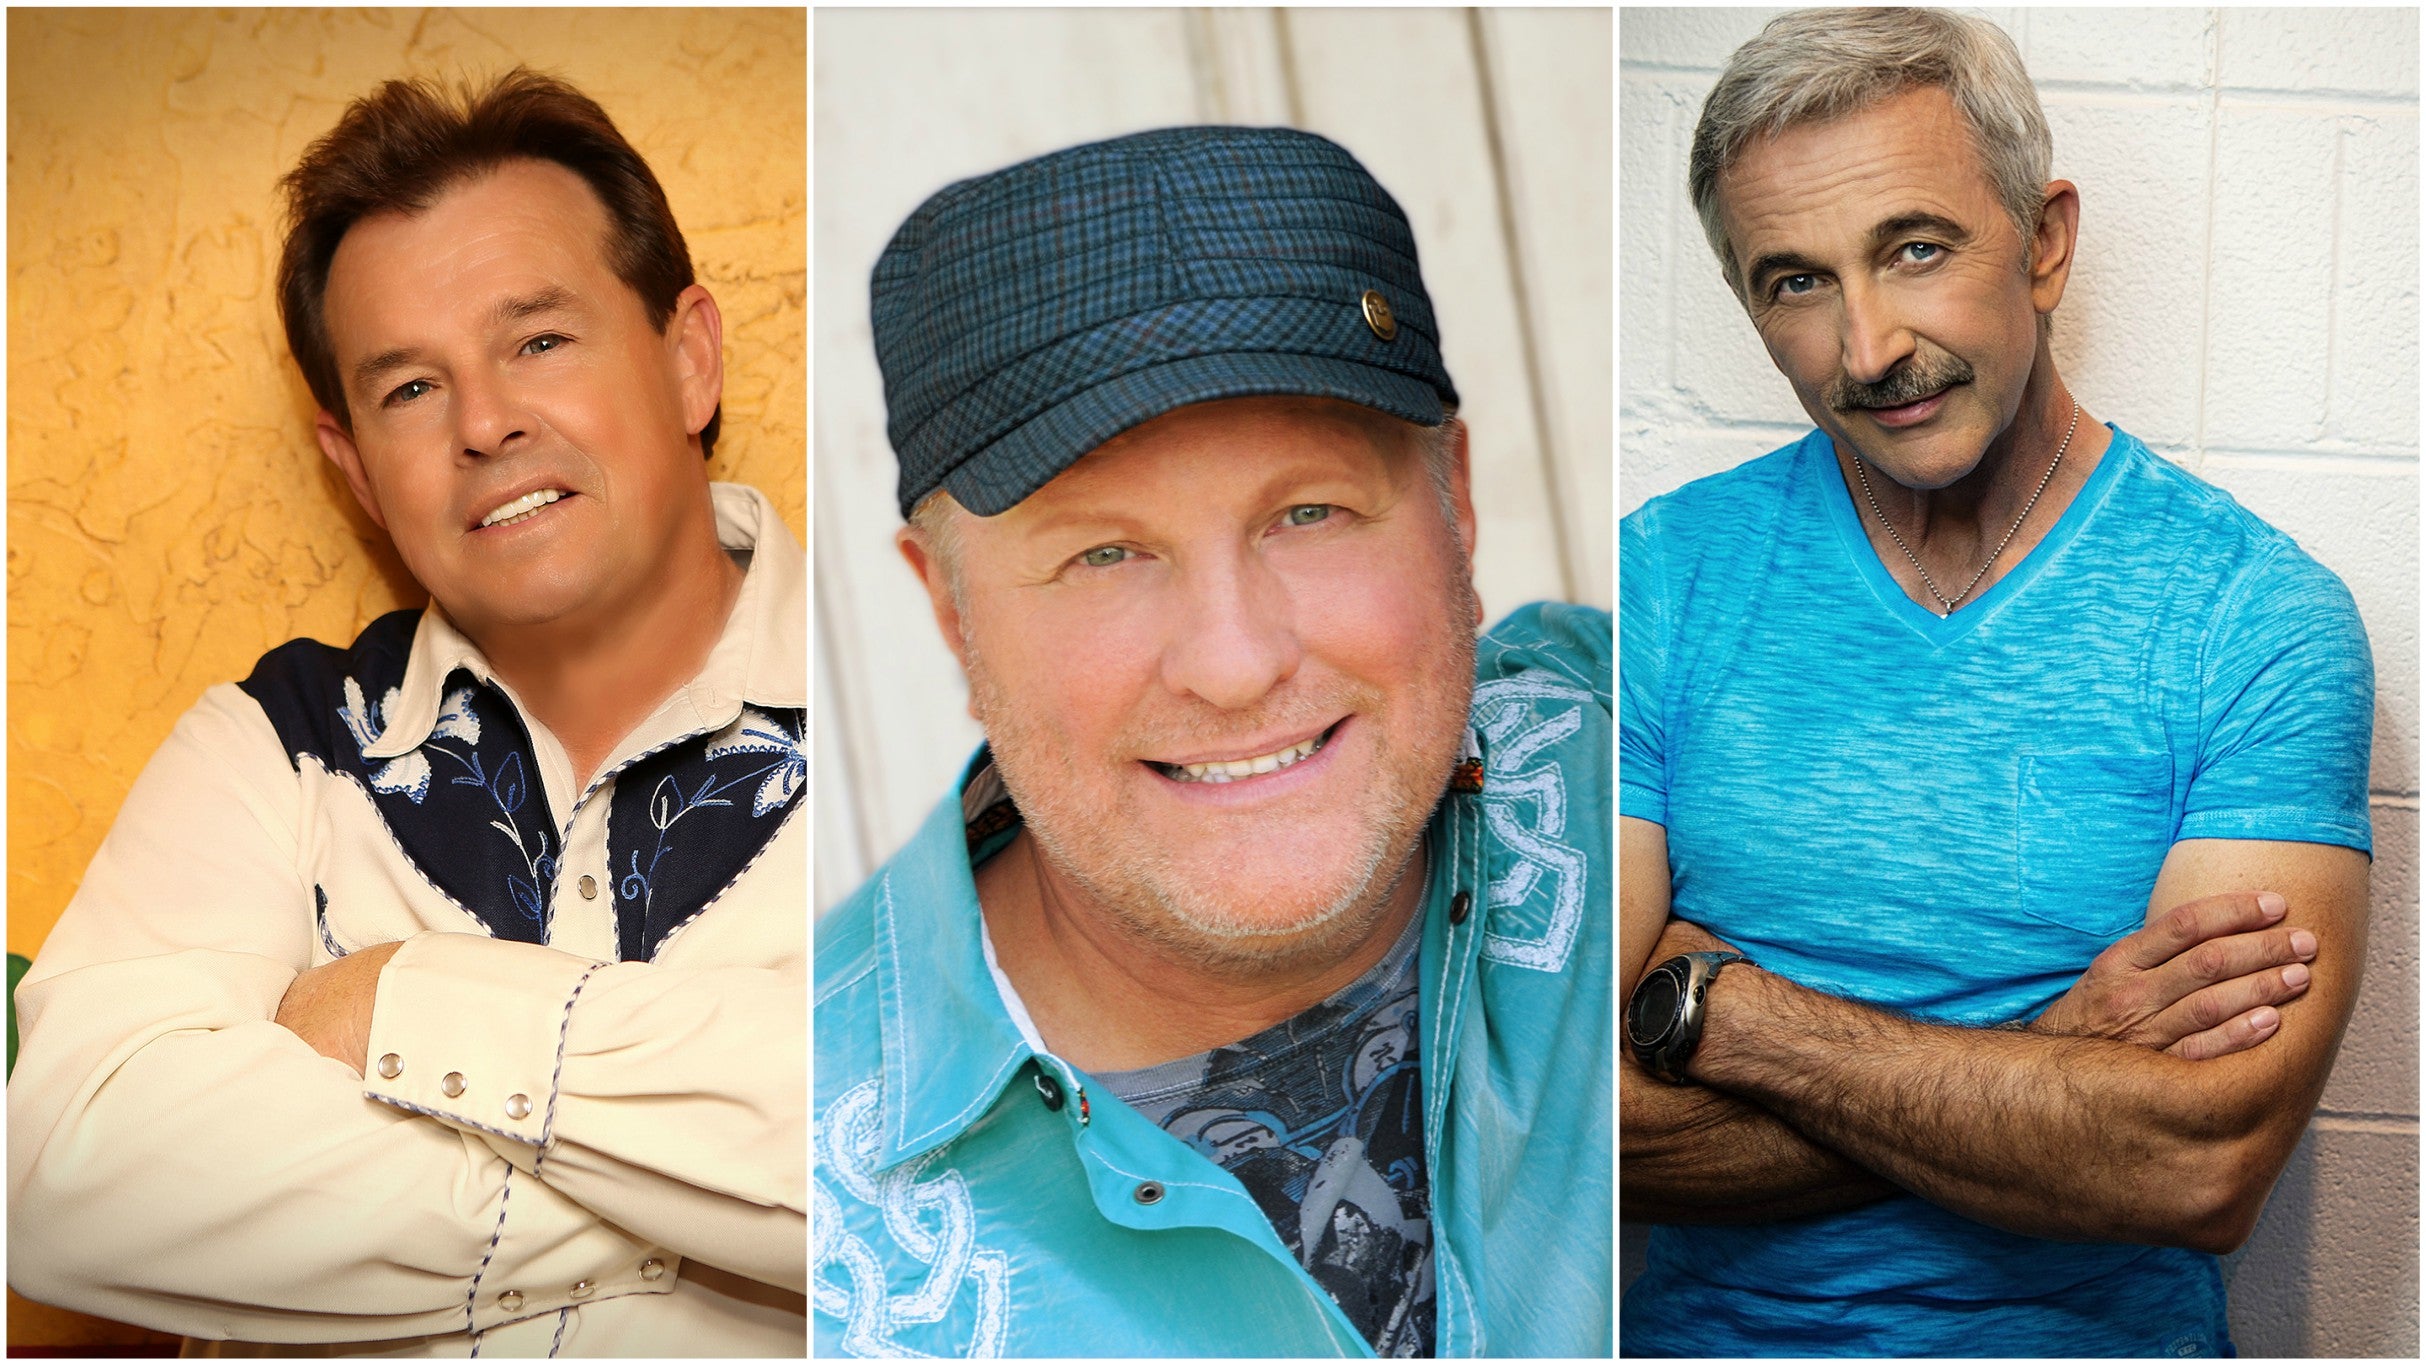 Roots and Boots - Sammy Kershaw, Aaron Tippin and Collin Raye in Saint Charles promo photo for Official Platinum presale offer code